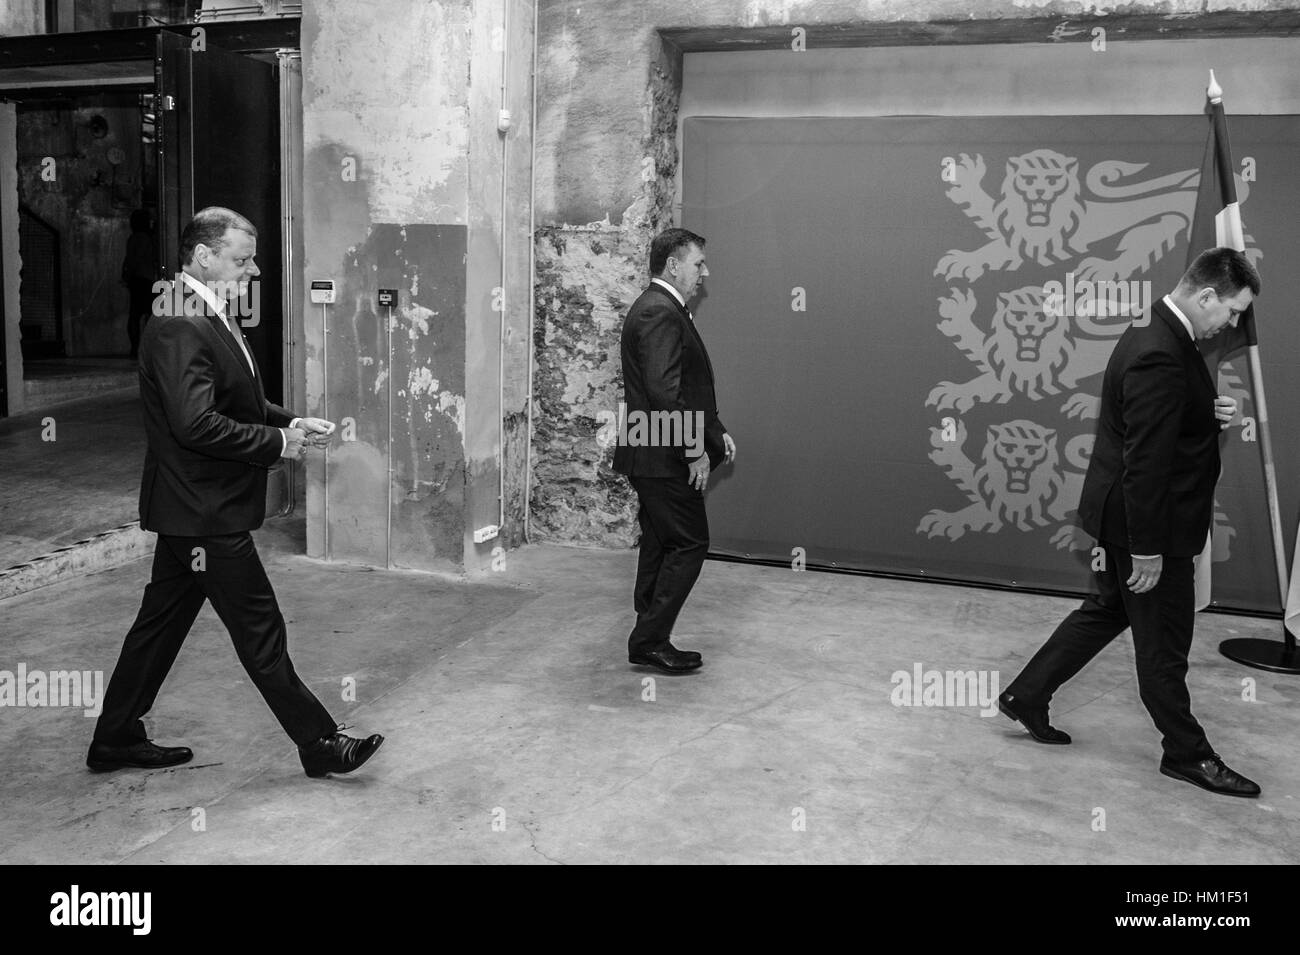 Tallinn, 31th January 2017. Estonian Prime Minister Juri Ratas (R), Latvian Prime Minister Maris Kucinskis (C) and Lithuanian Prime Minister Saulius Skvernelis (L) arrive prior a meeting with the Baltic prime ministers. The three Baltic prime ministers meet today to discuss on regional security, energy and transport links, as well as the future of the European Union. Nicolas Bouvy/Alamy Live News Stock Photo